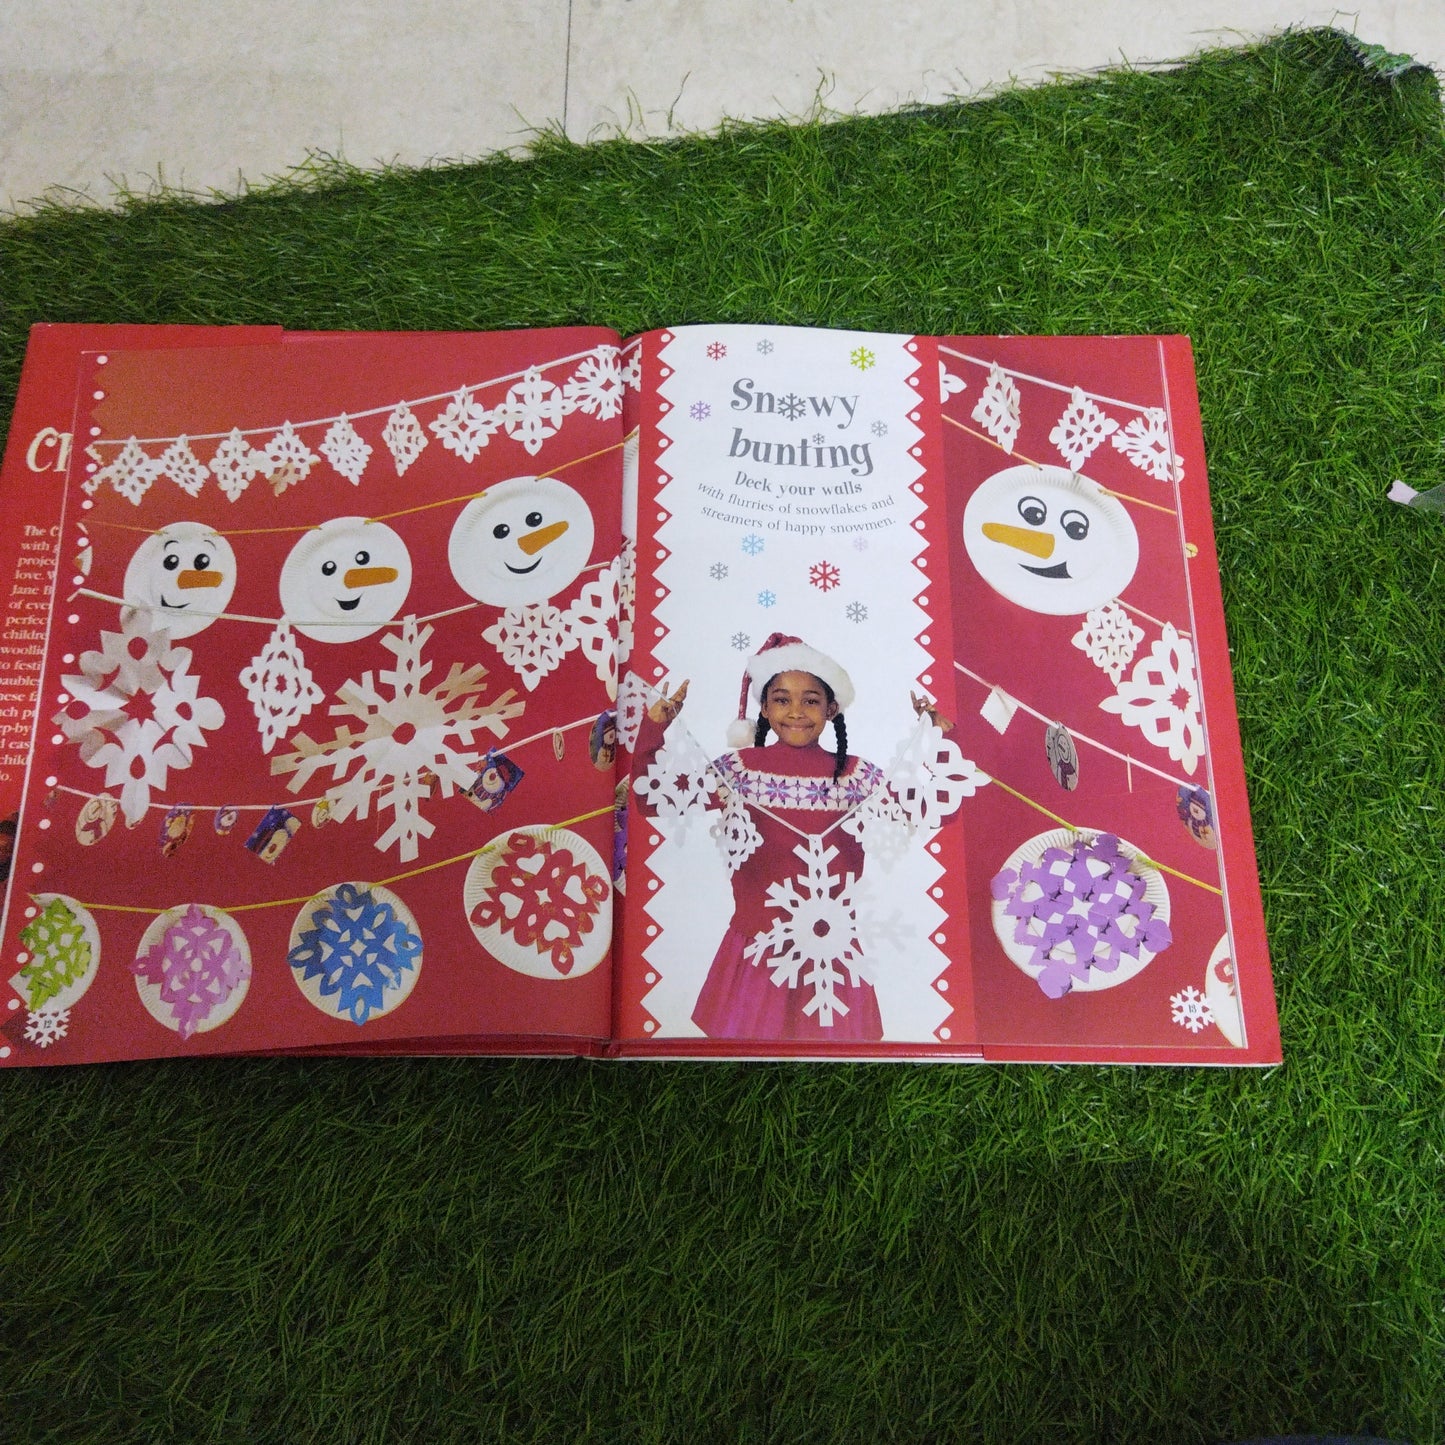 The Merry Christmas Activity book